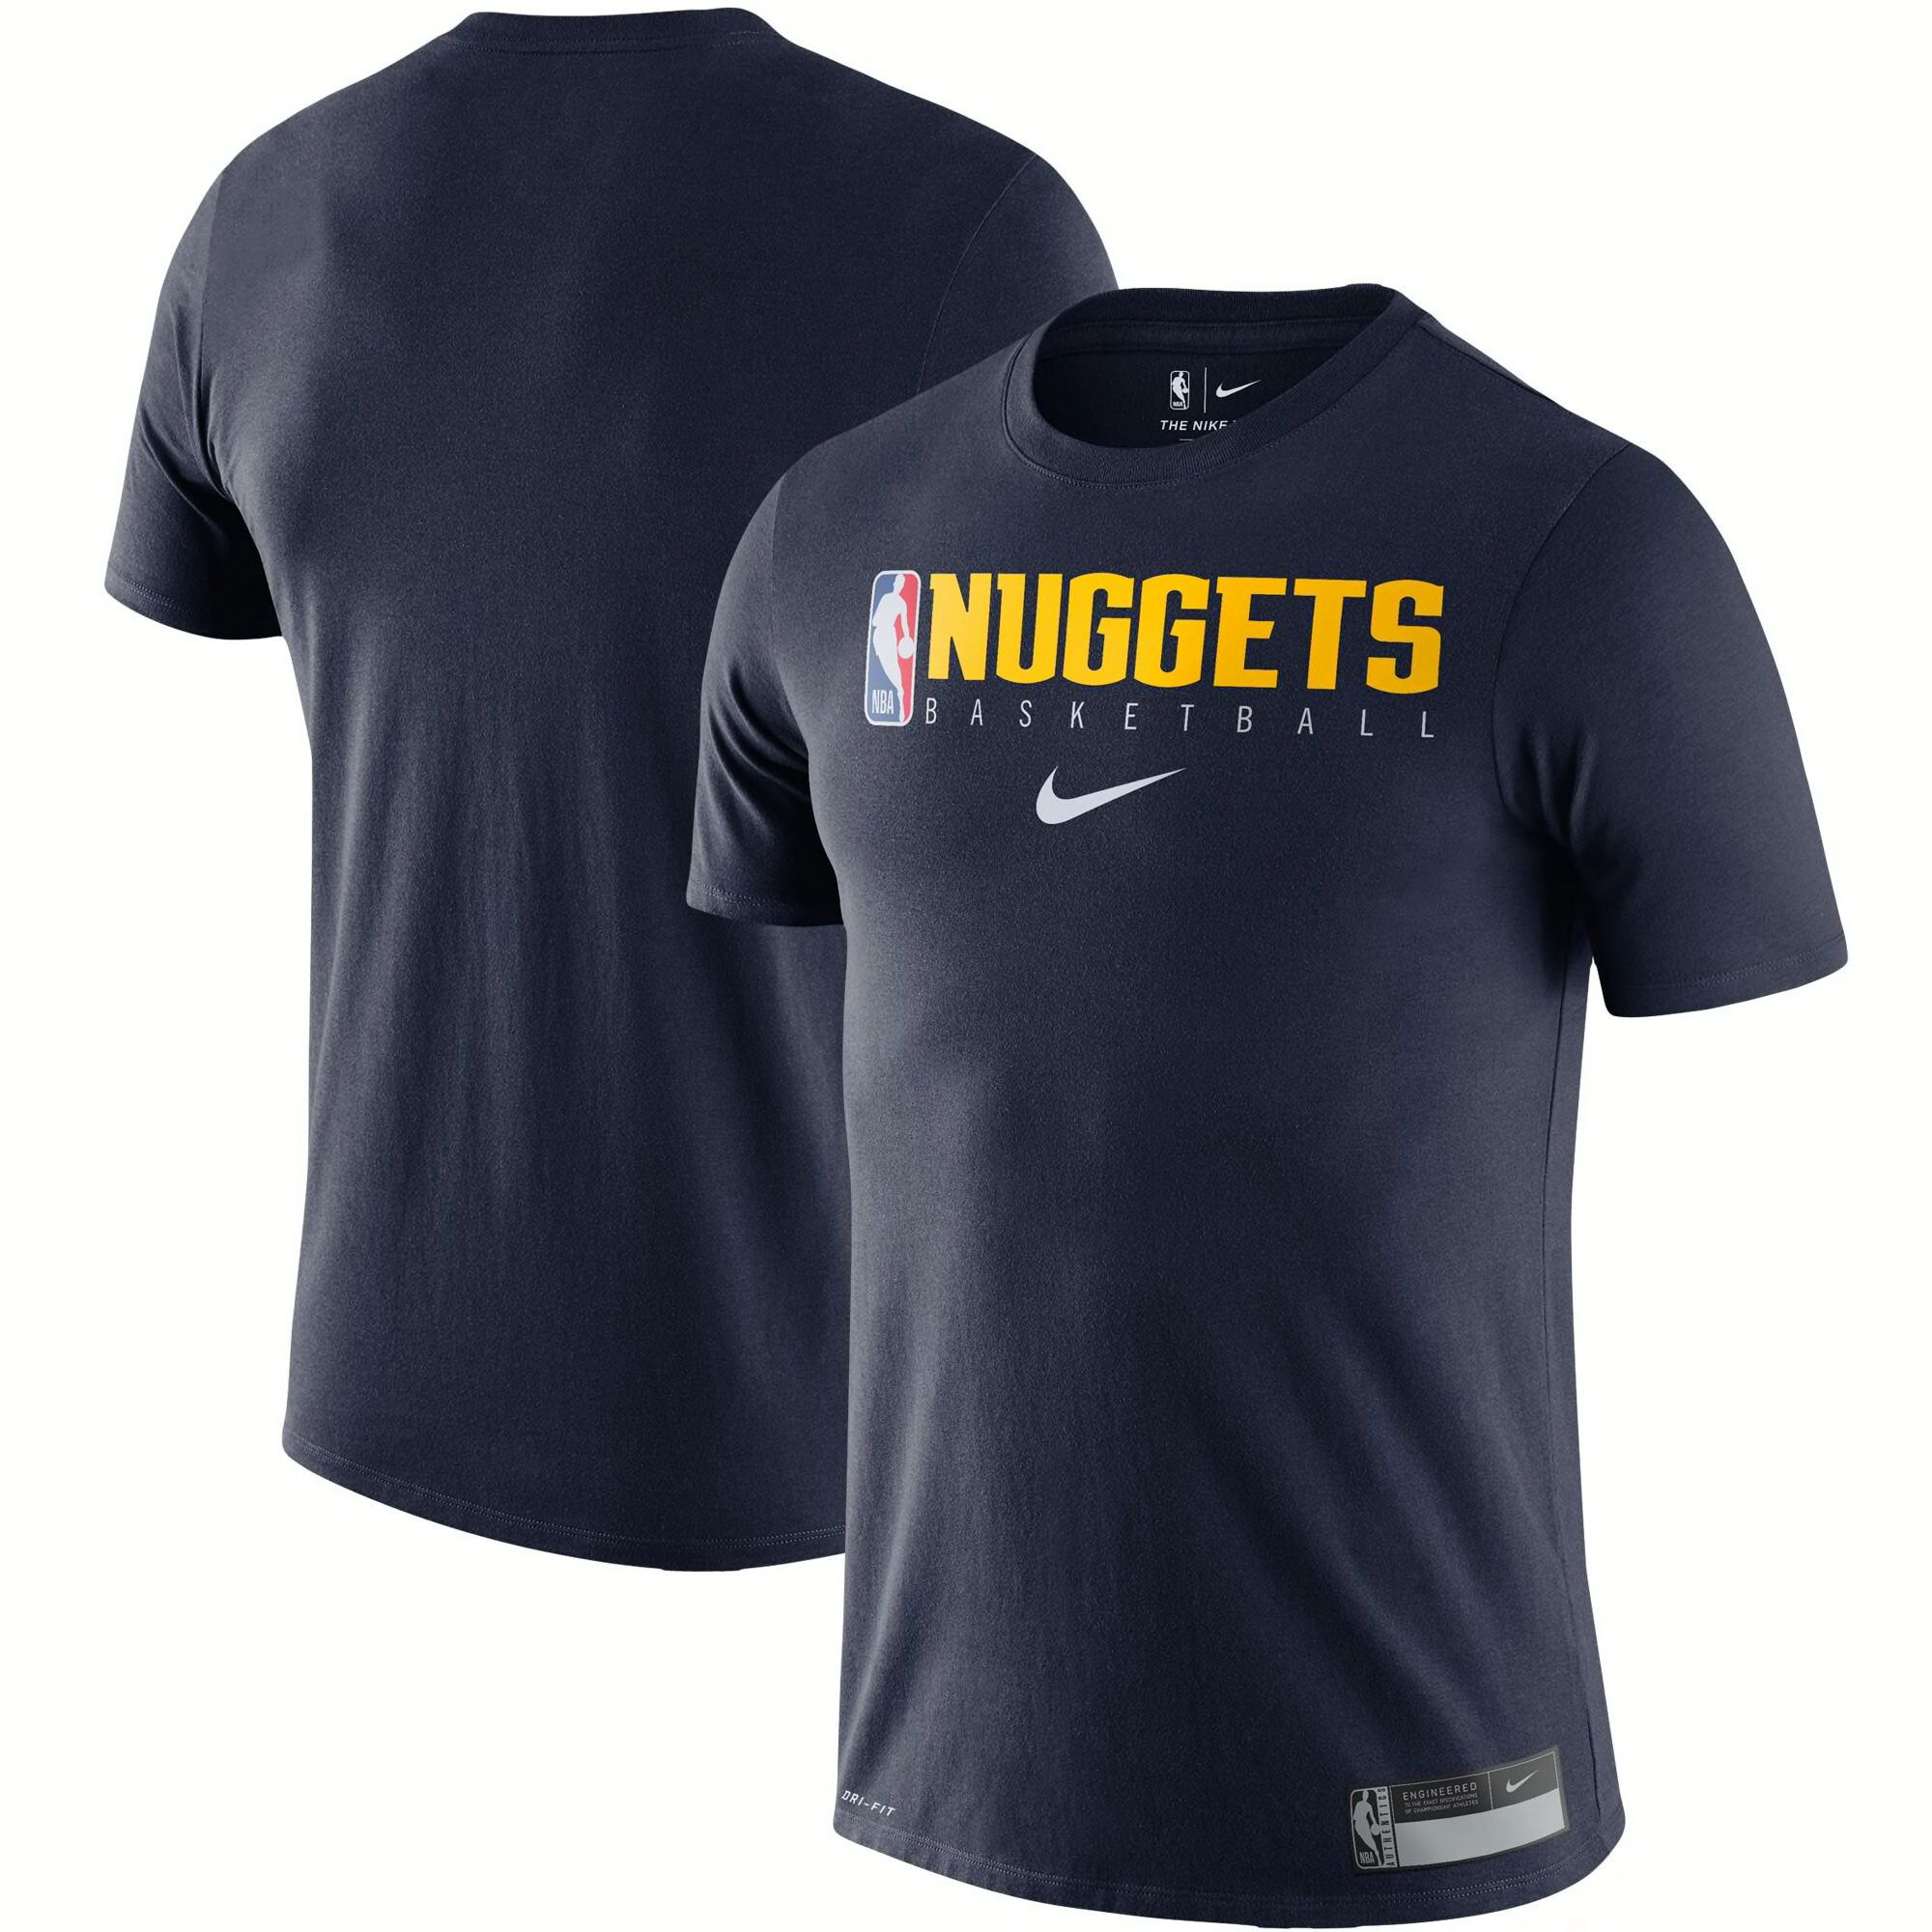 Father’s Day gifts for the Denver Nuggets fan